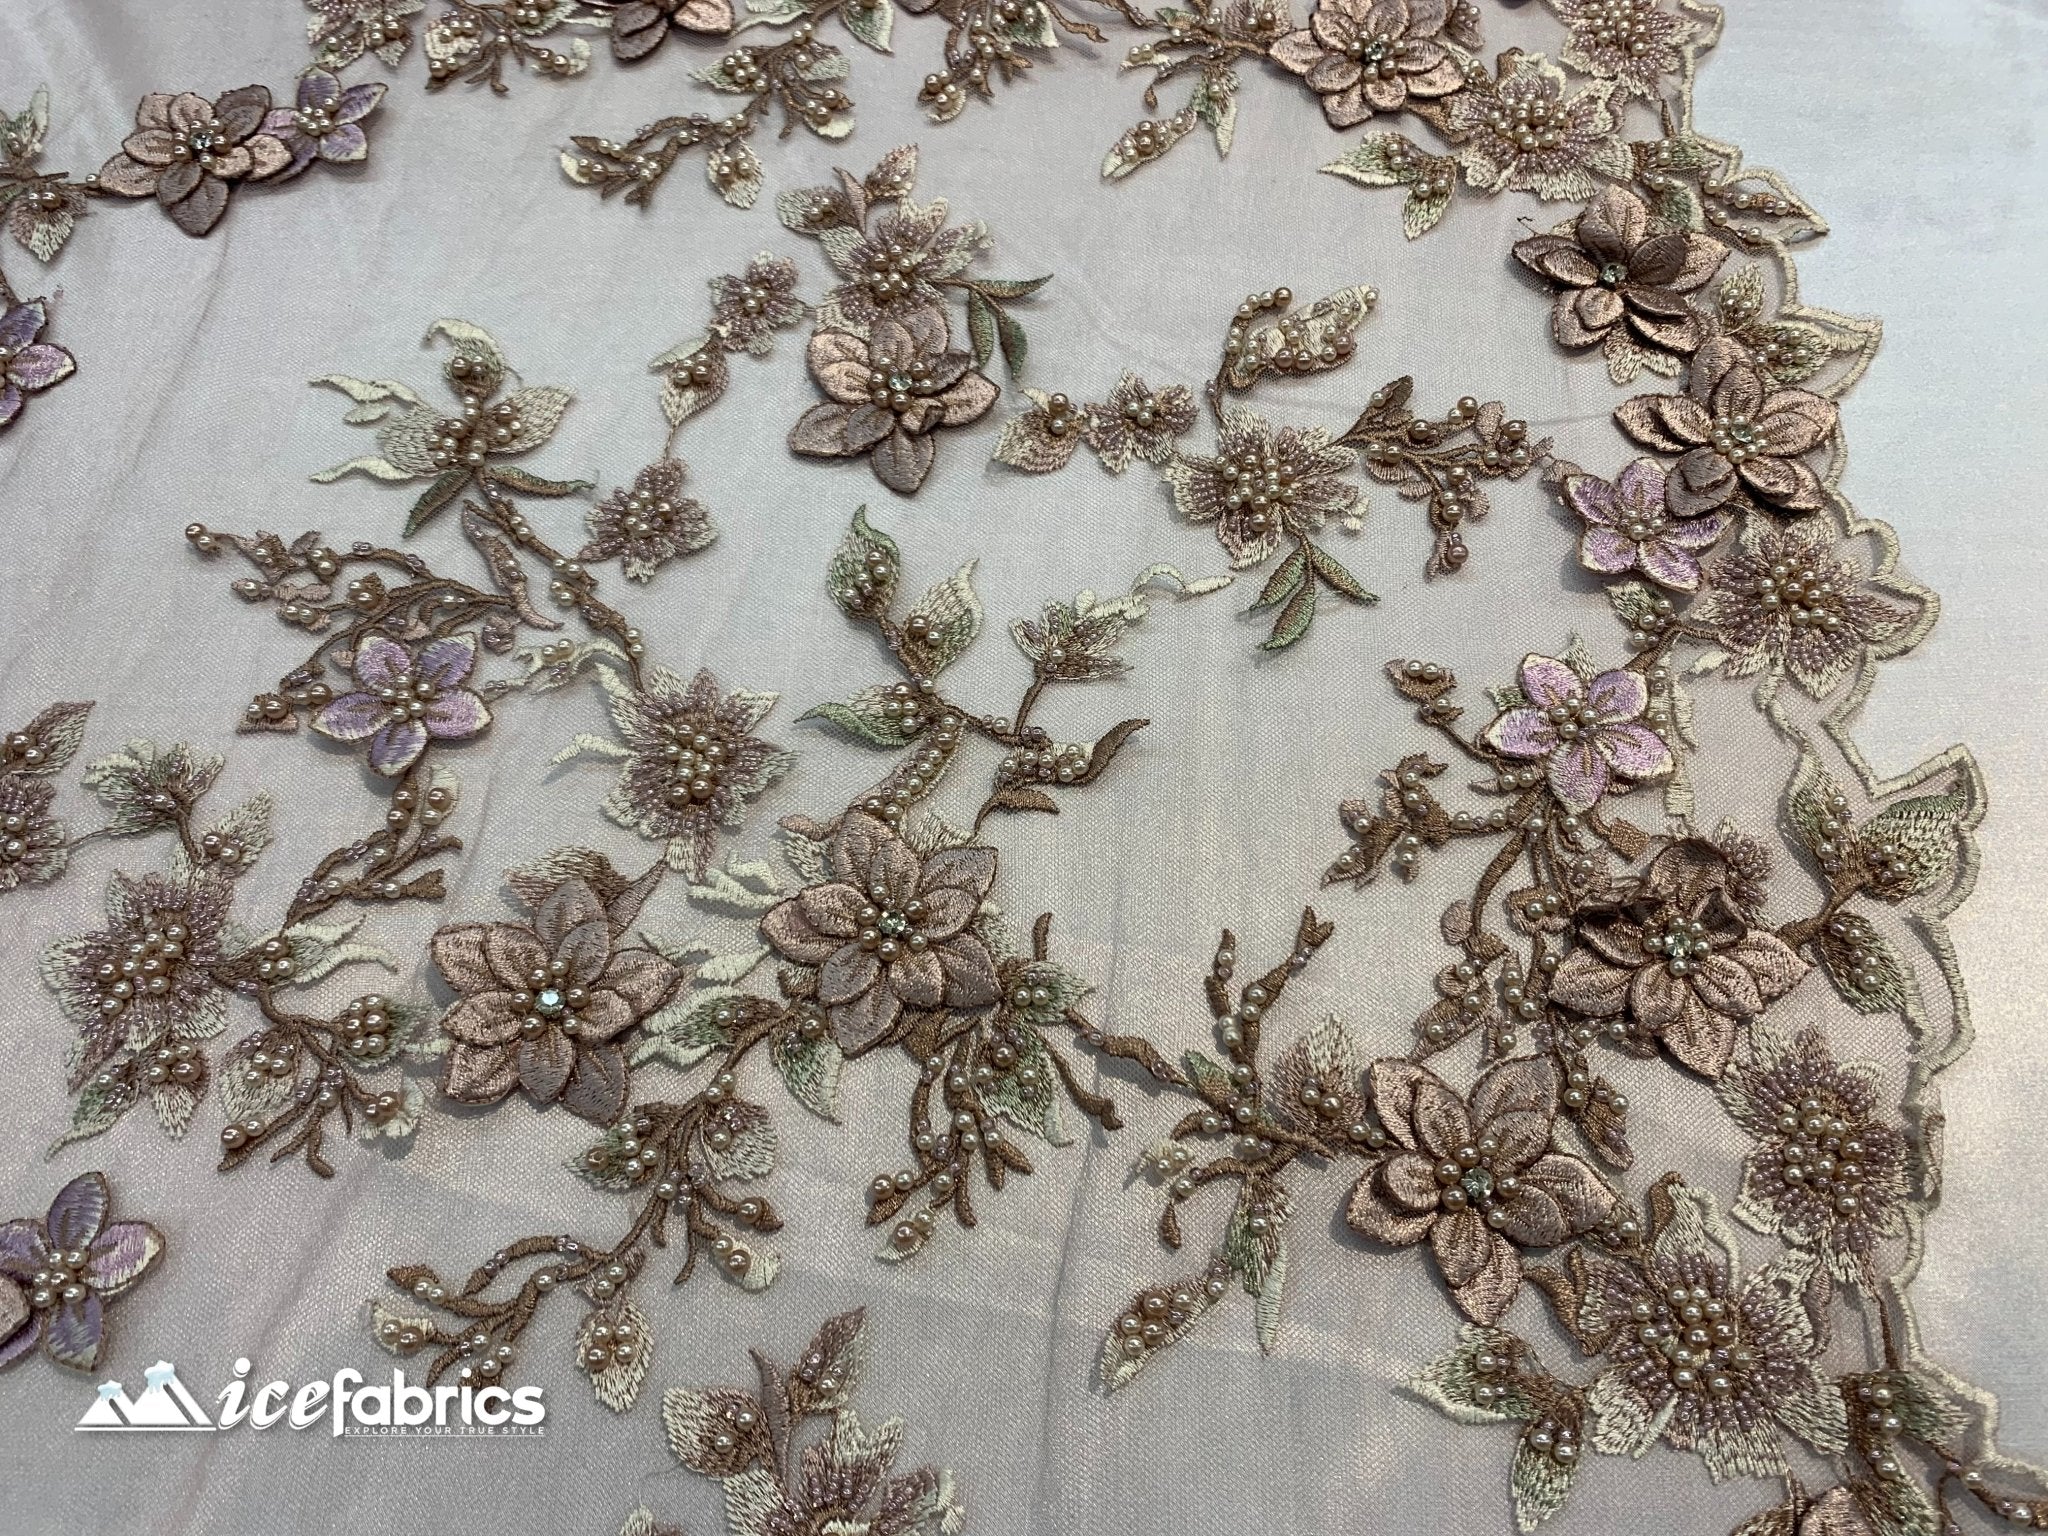 Flowers Embroidered Beaded Fabric/ Mesh Lace Fabric/ Bridal Fabric/ICE FABRICSICE FABRICSRose GoldFlowers Embroidered Beaded Fabric/ Mesh Lace Fabric/ Bridal Fabric/ ICE FABRICS Rose Gold